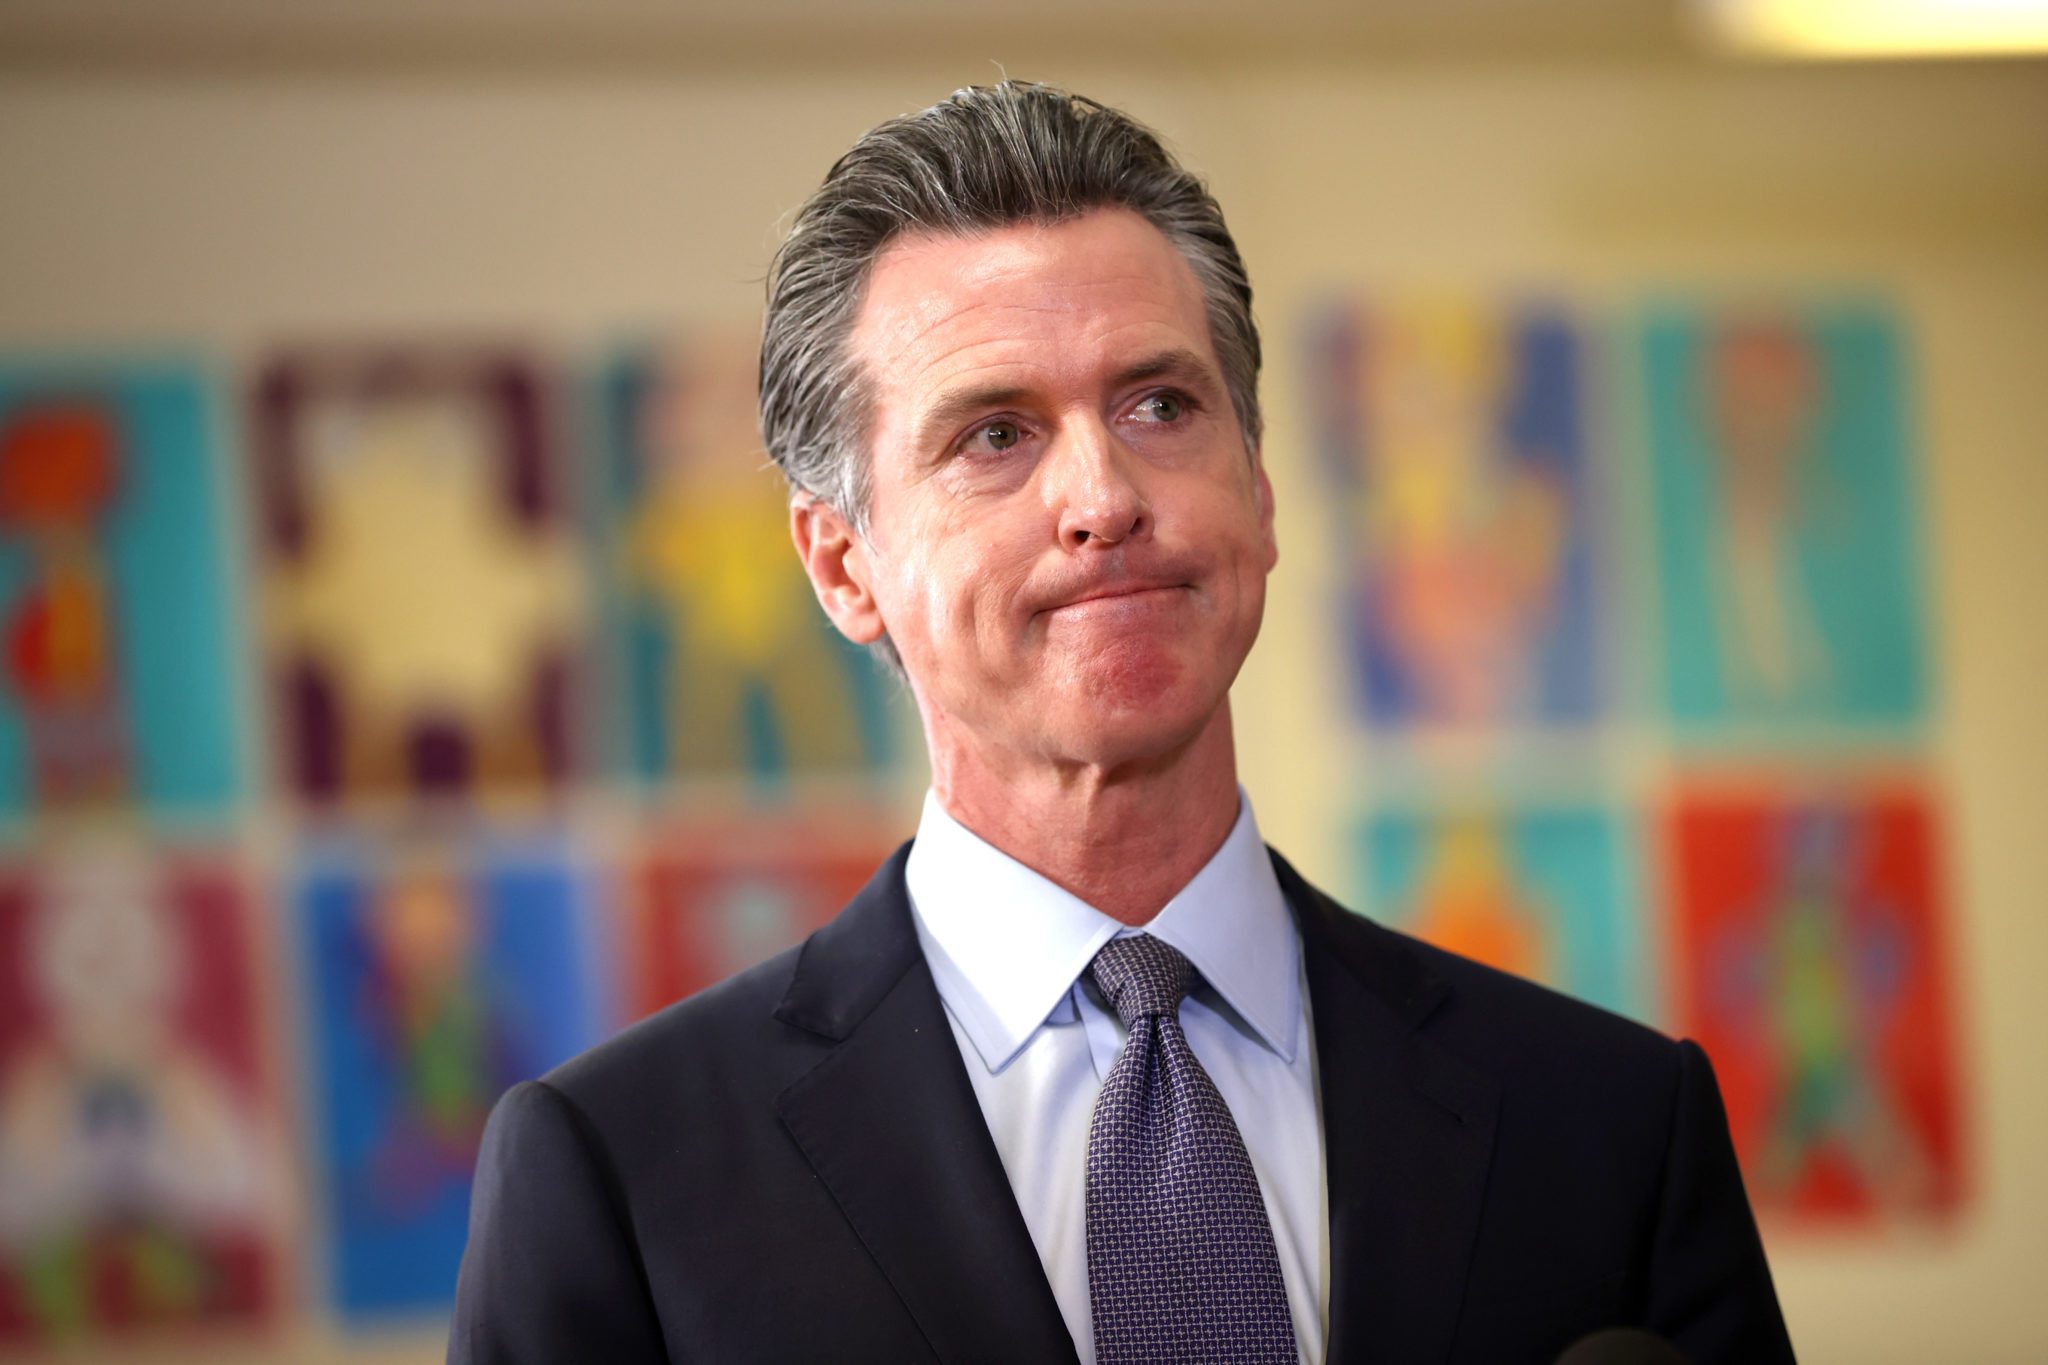 California Governor Newsom Speaks On State's School Safety And Covid Prevention Efforts